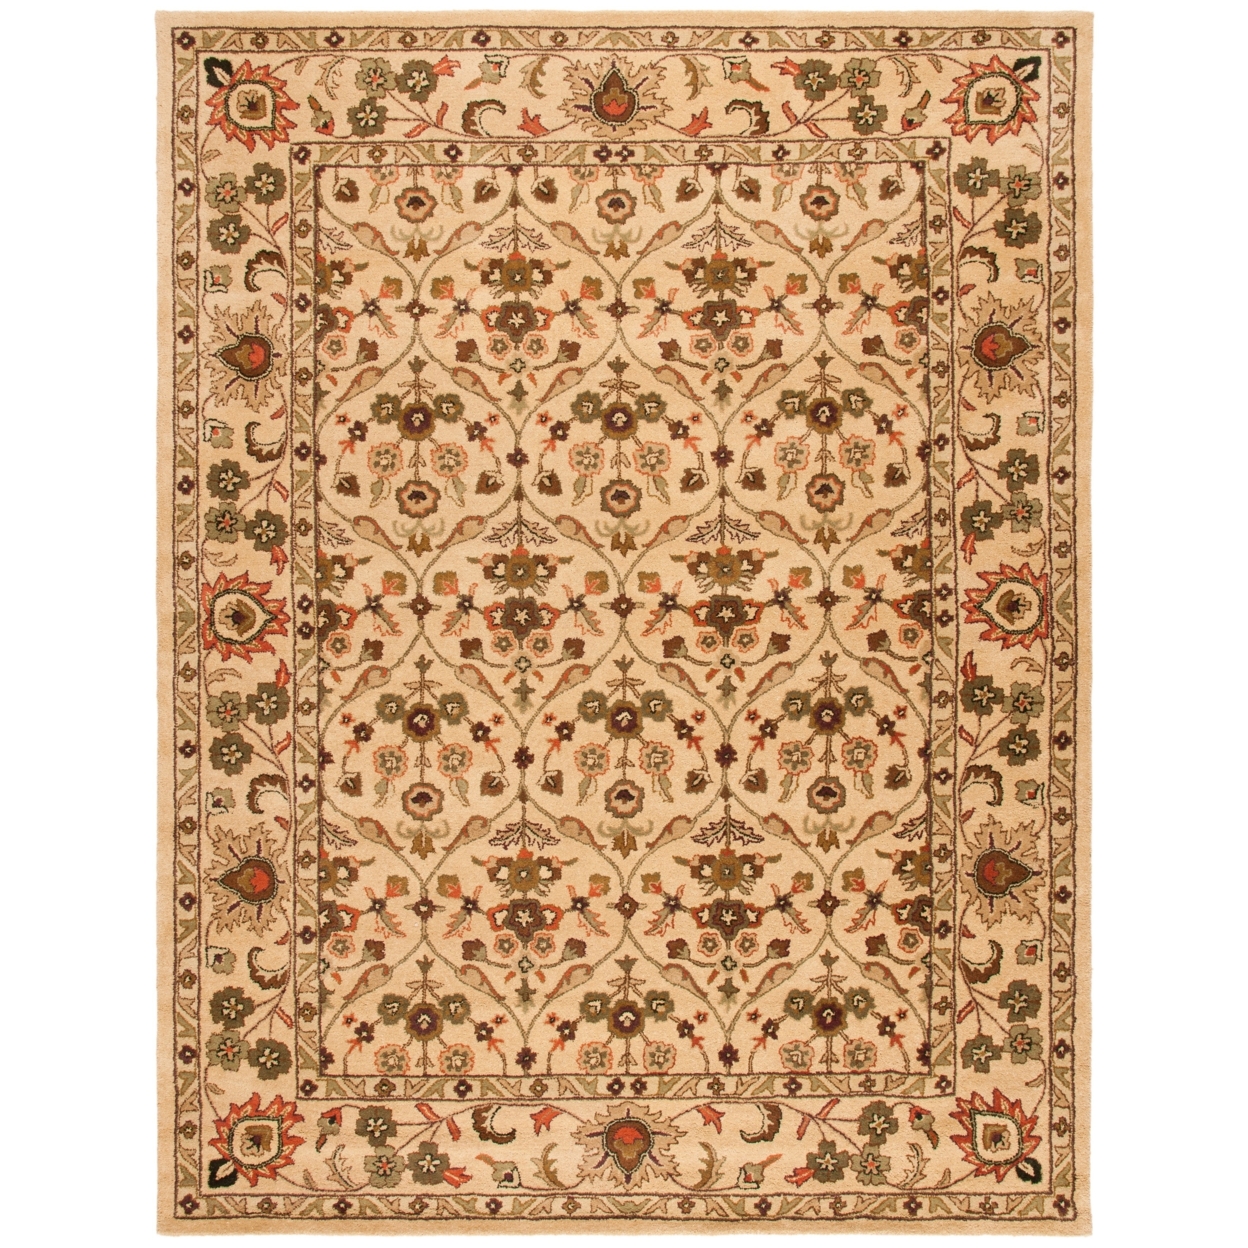 SAFAVIEH Antiquity Collection AT51C Handmade Gold Rug - 8' 3 X 11'